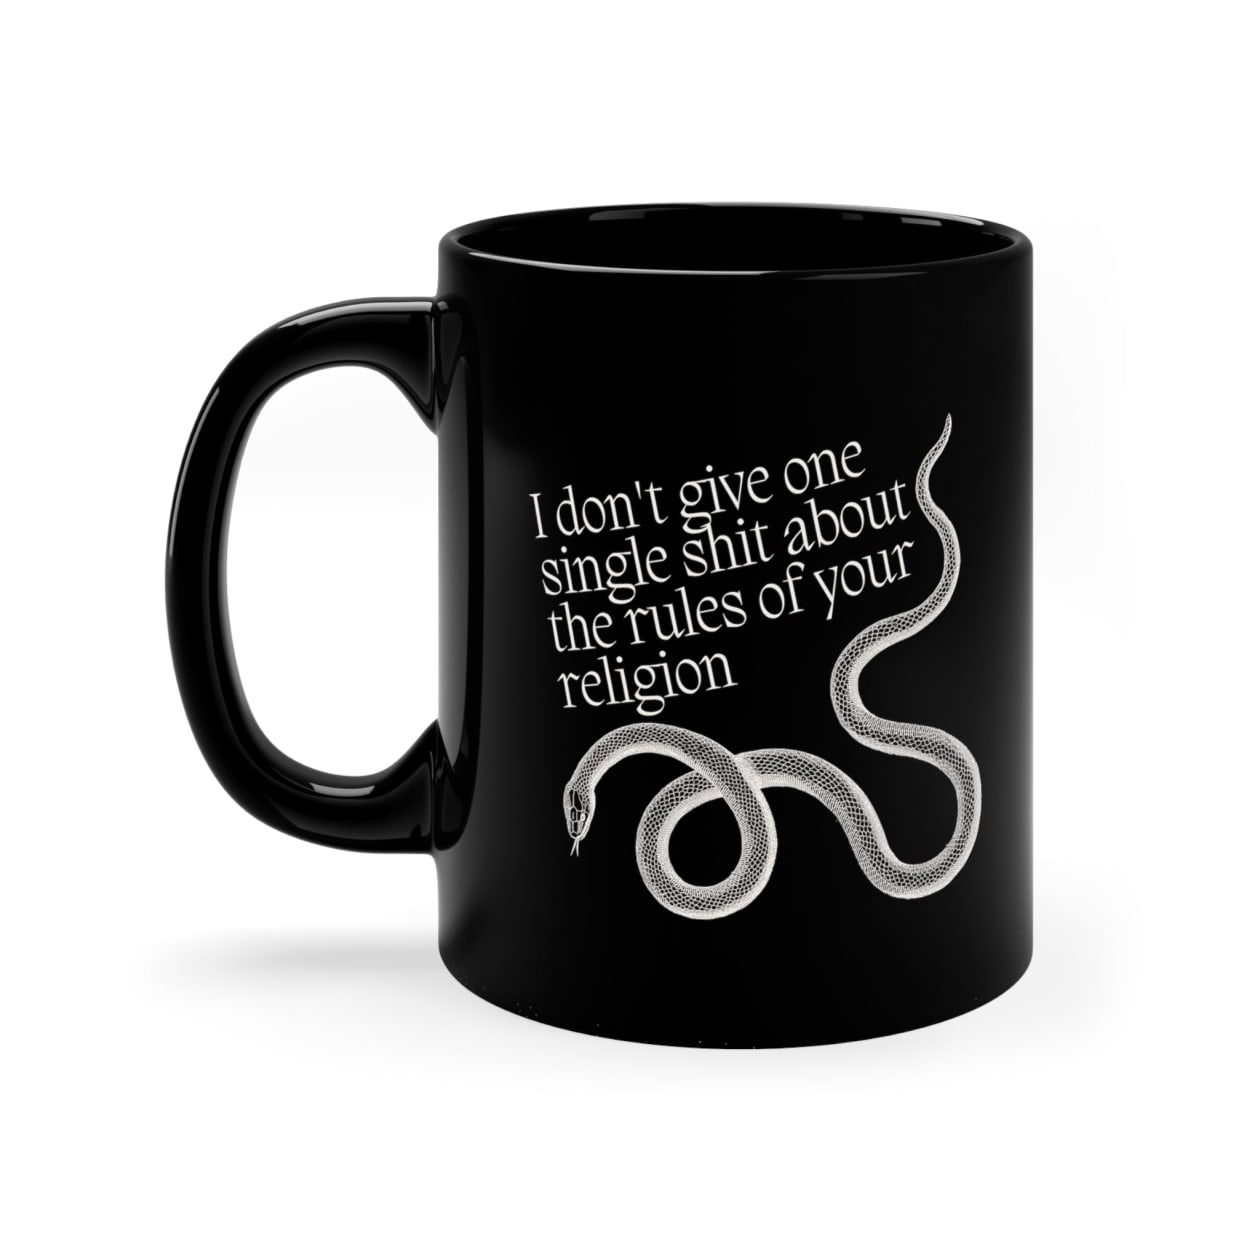 I Don't Give One Single Shit About the Rules of Your Religion Snake Mug in Black - Size: 11oz